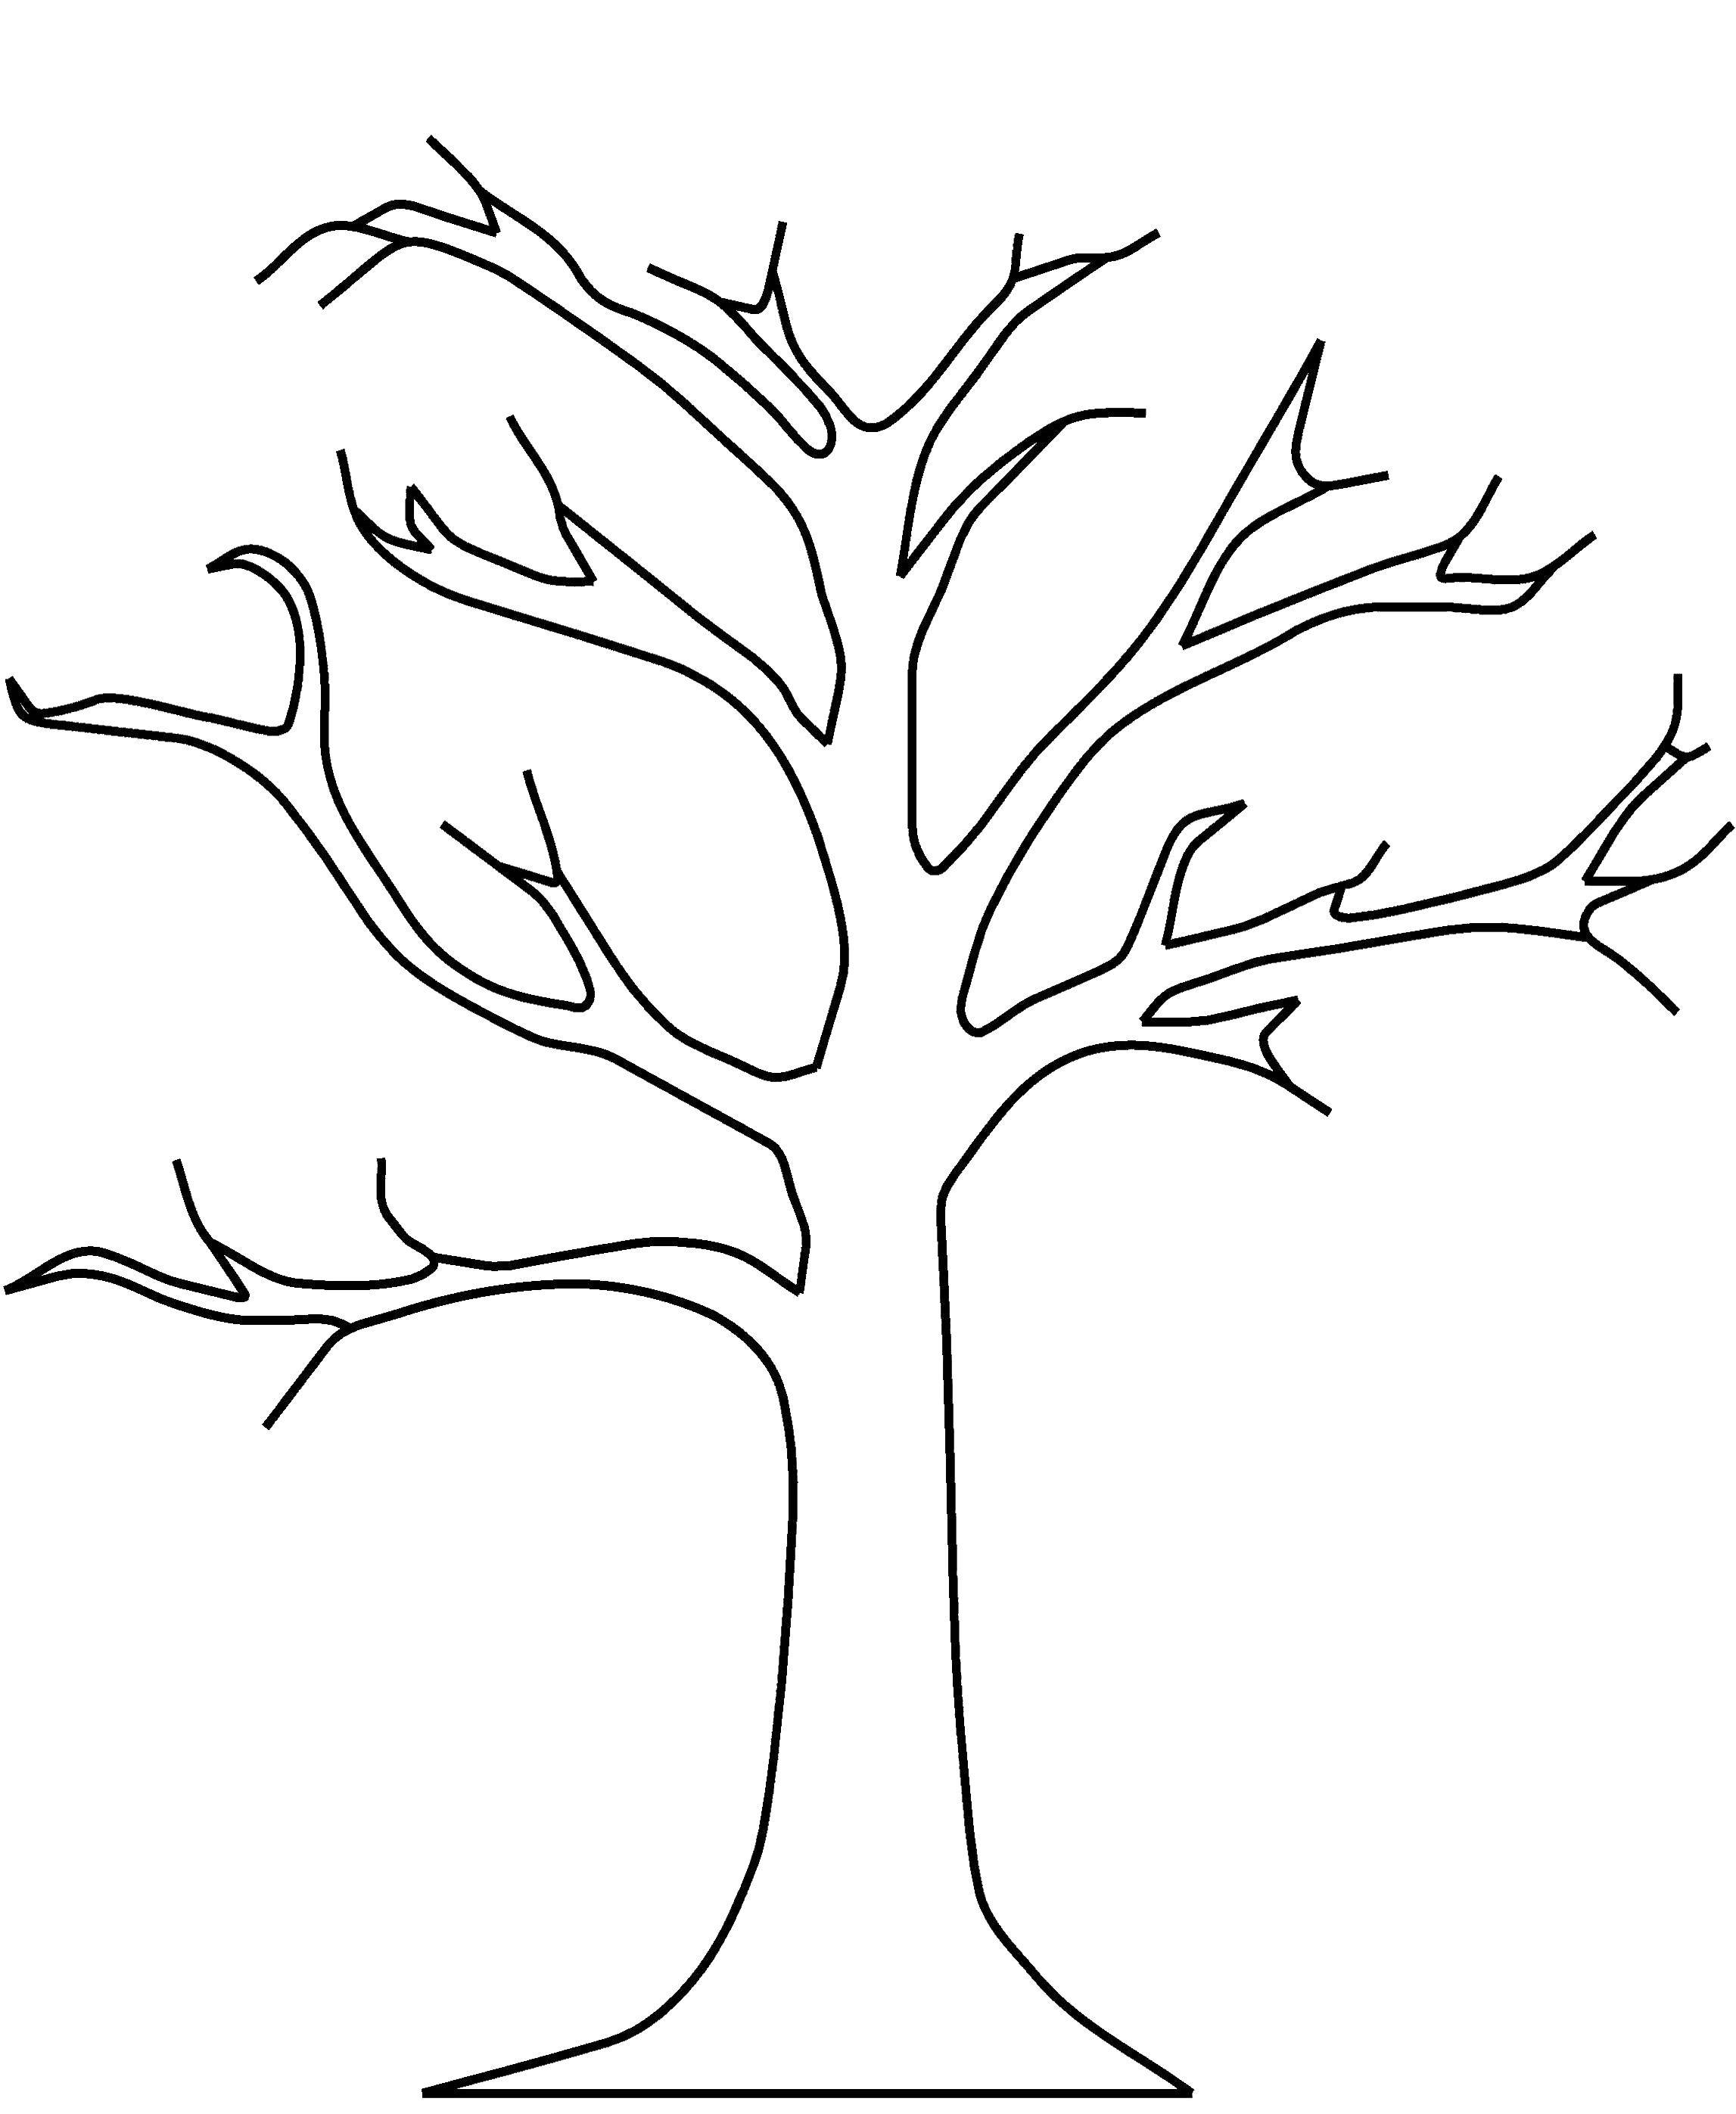 Coloring The bare branches. Category The contour of the tree. Tags:  The trees.